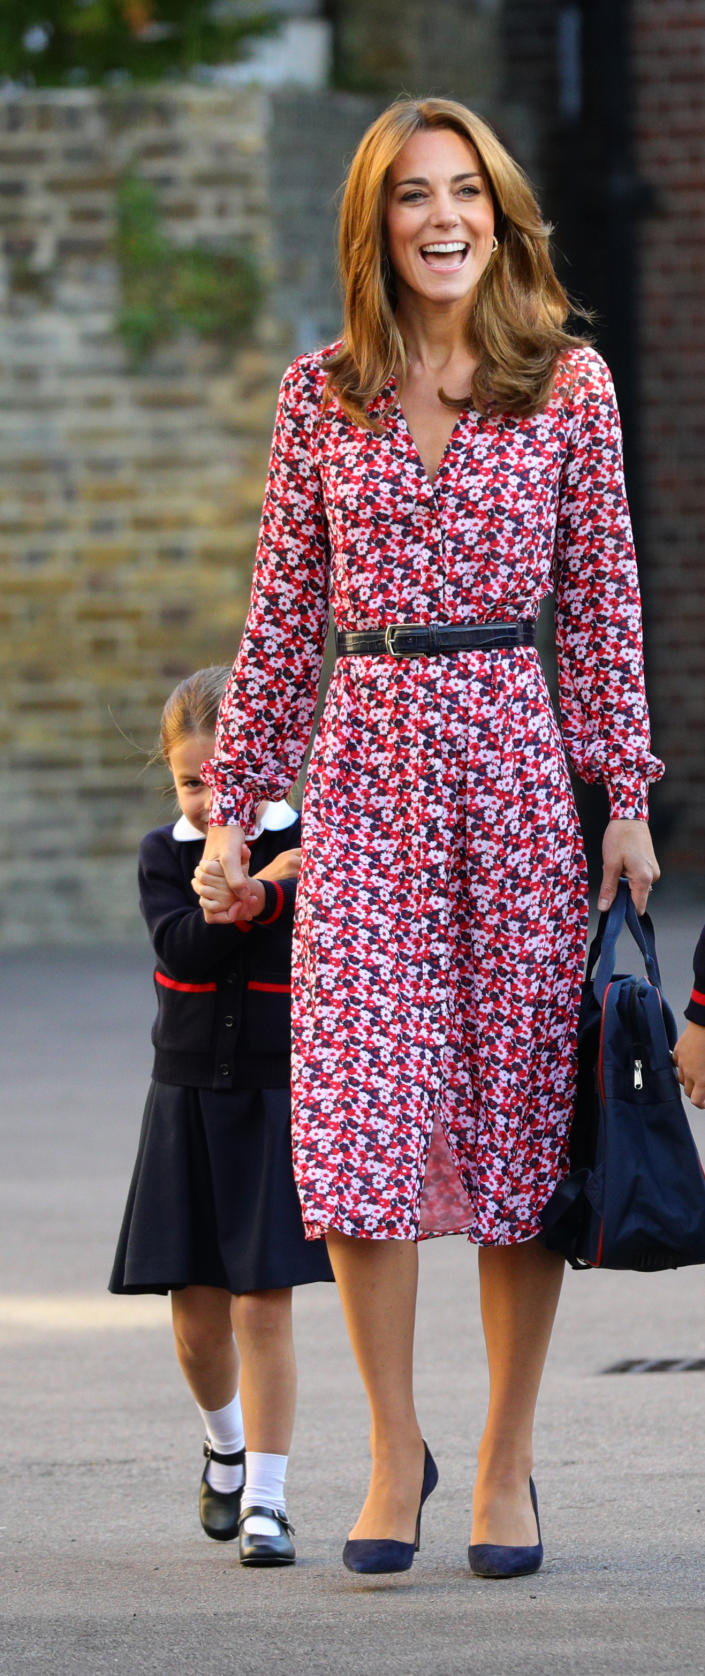 The Duchess of Cambridge wore a statement Michael Kors dress for the school drop-off [Photo: Getty]